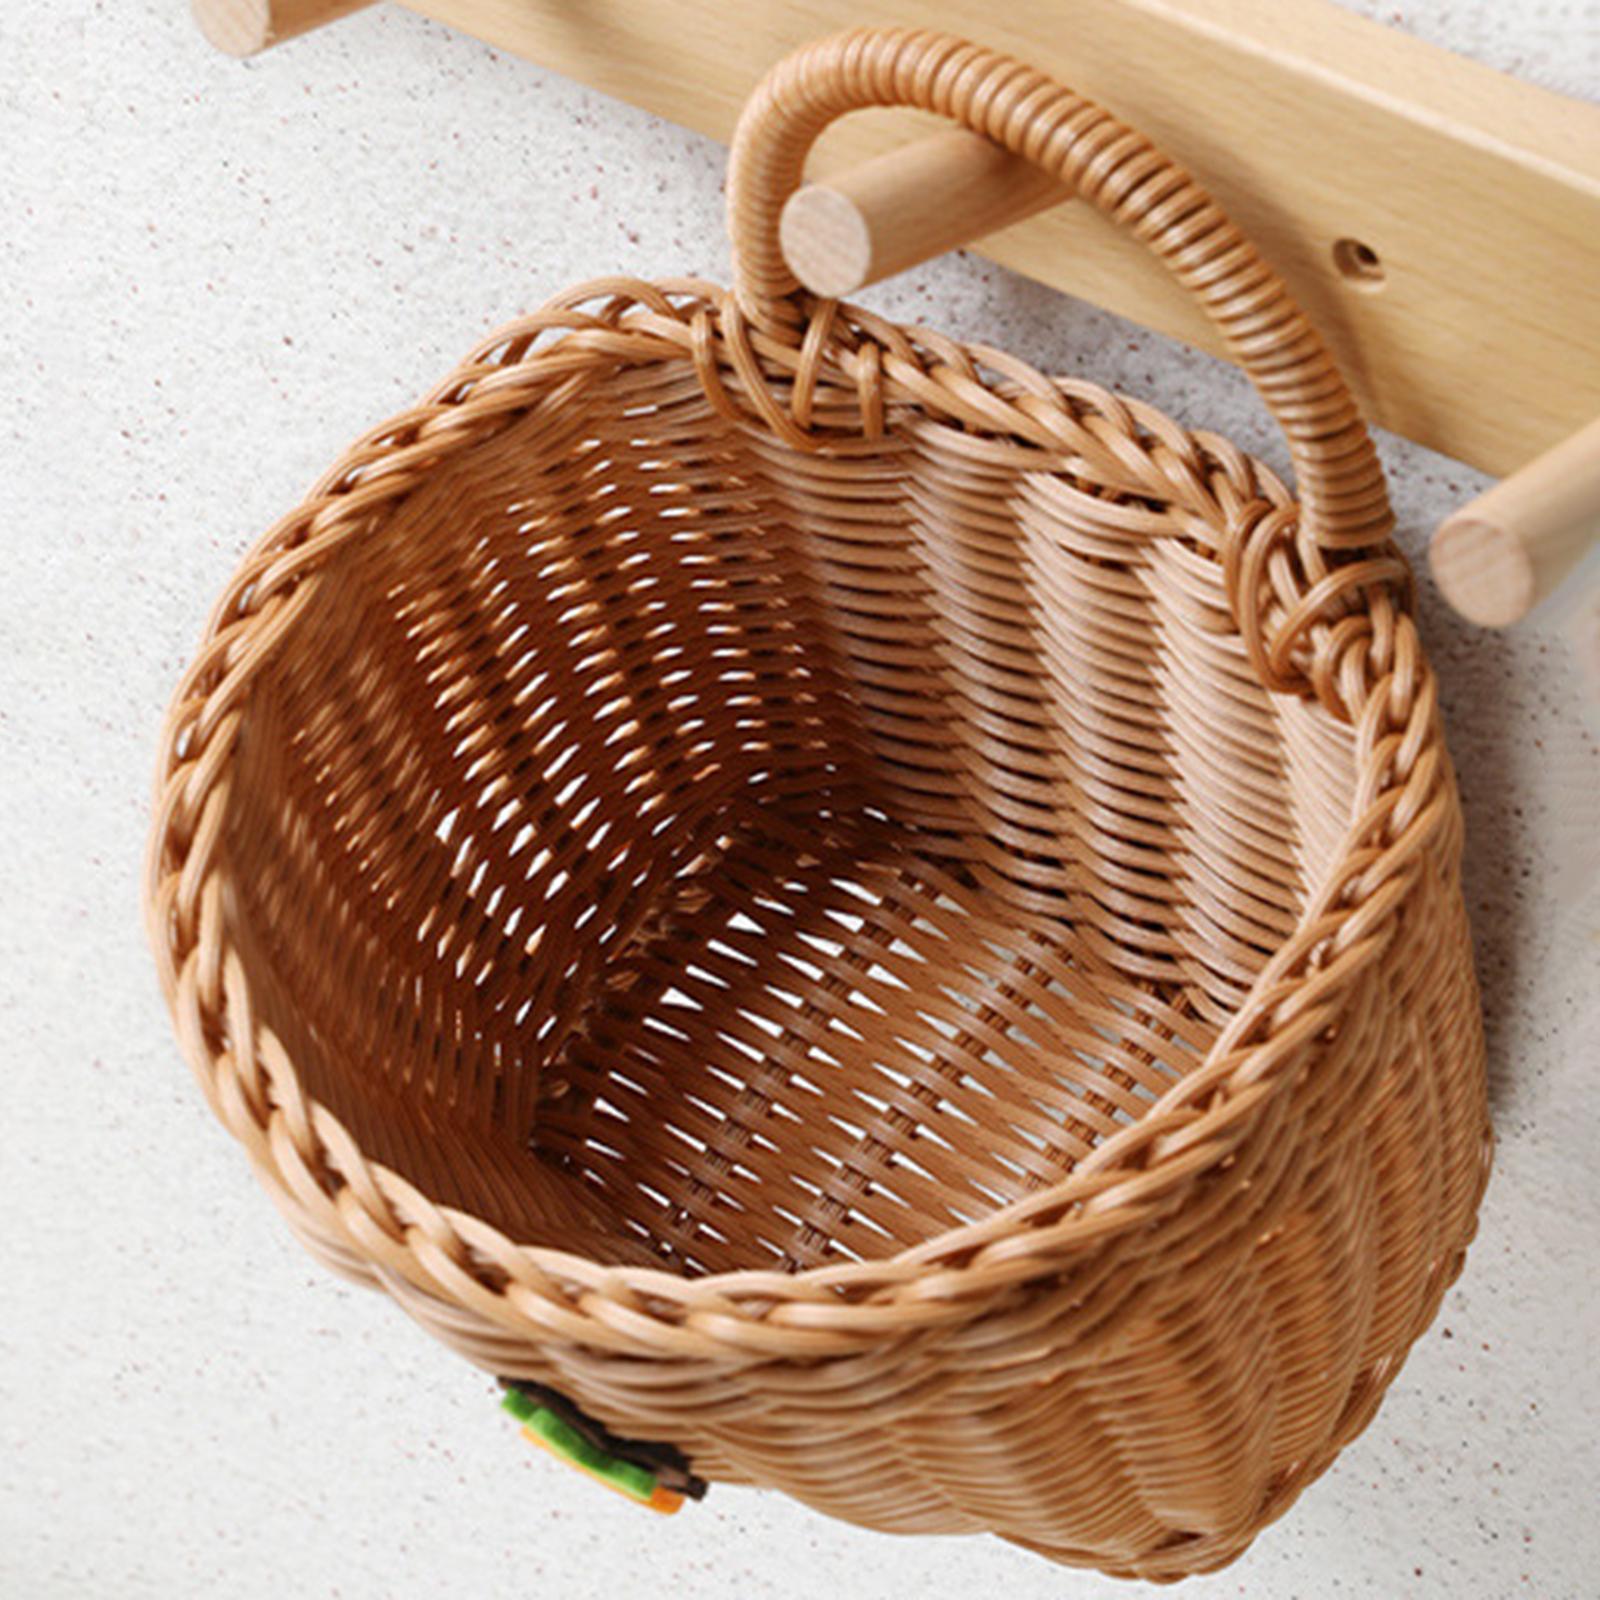 Wall Mount Basket Garden Washable Toiletries Ginger Towels Woven Wall Basket A